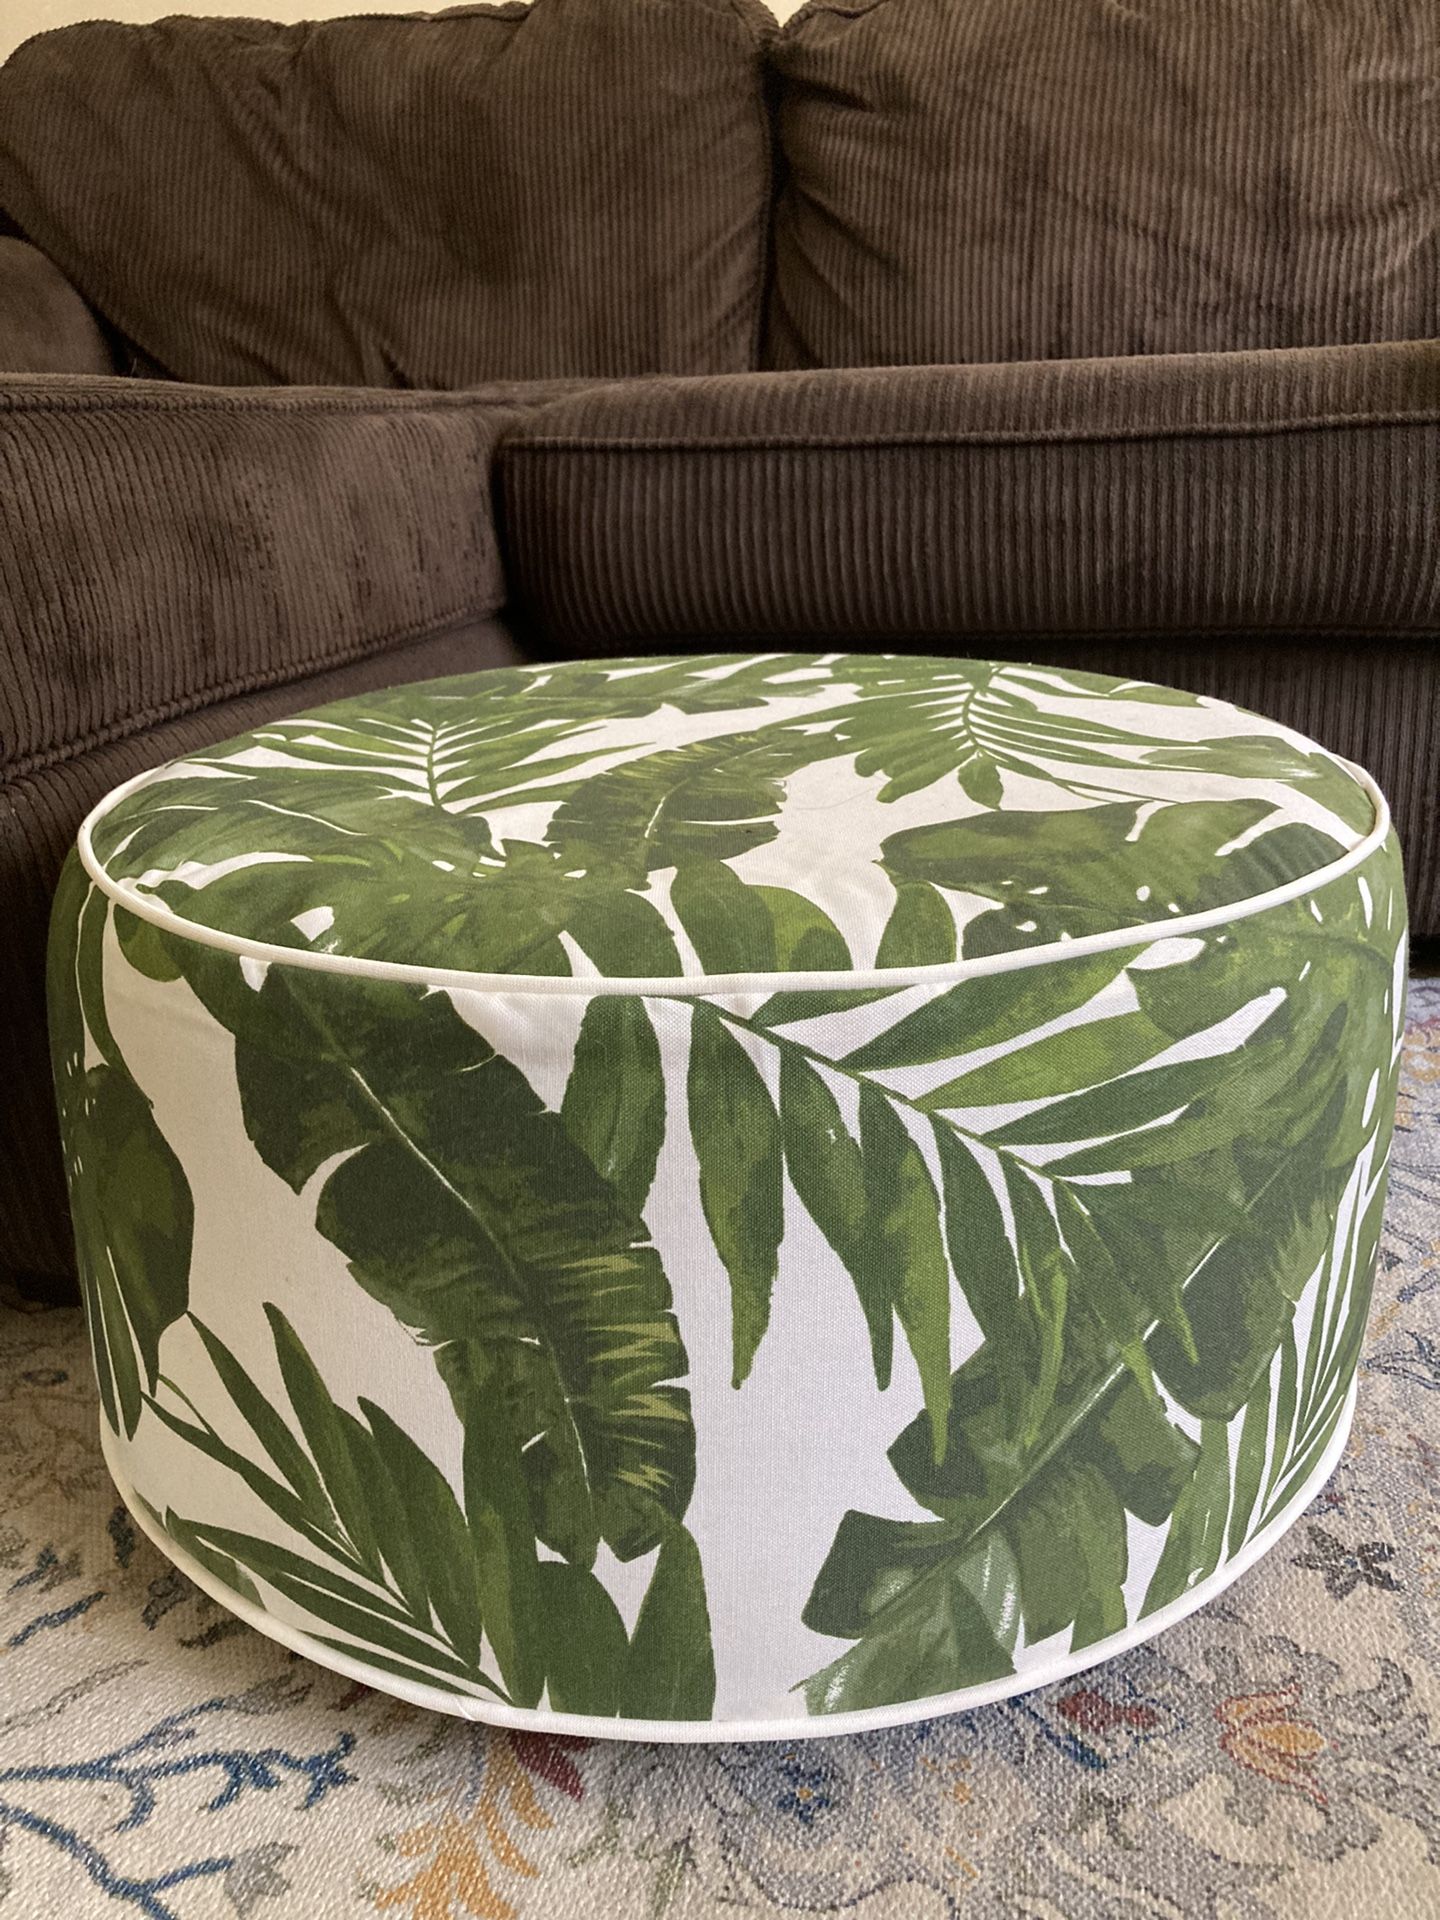 Inflatable Footstool Barely Used Like New 